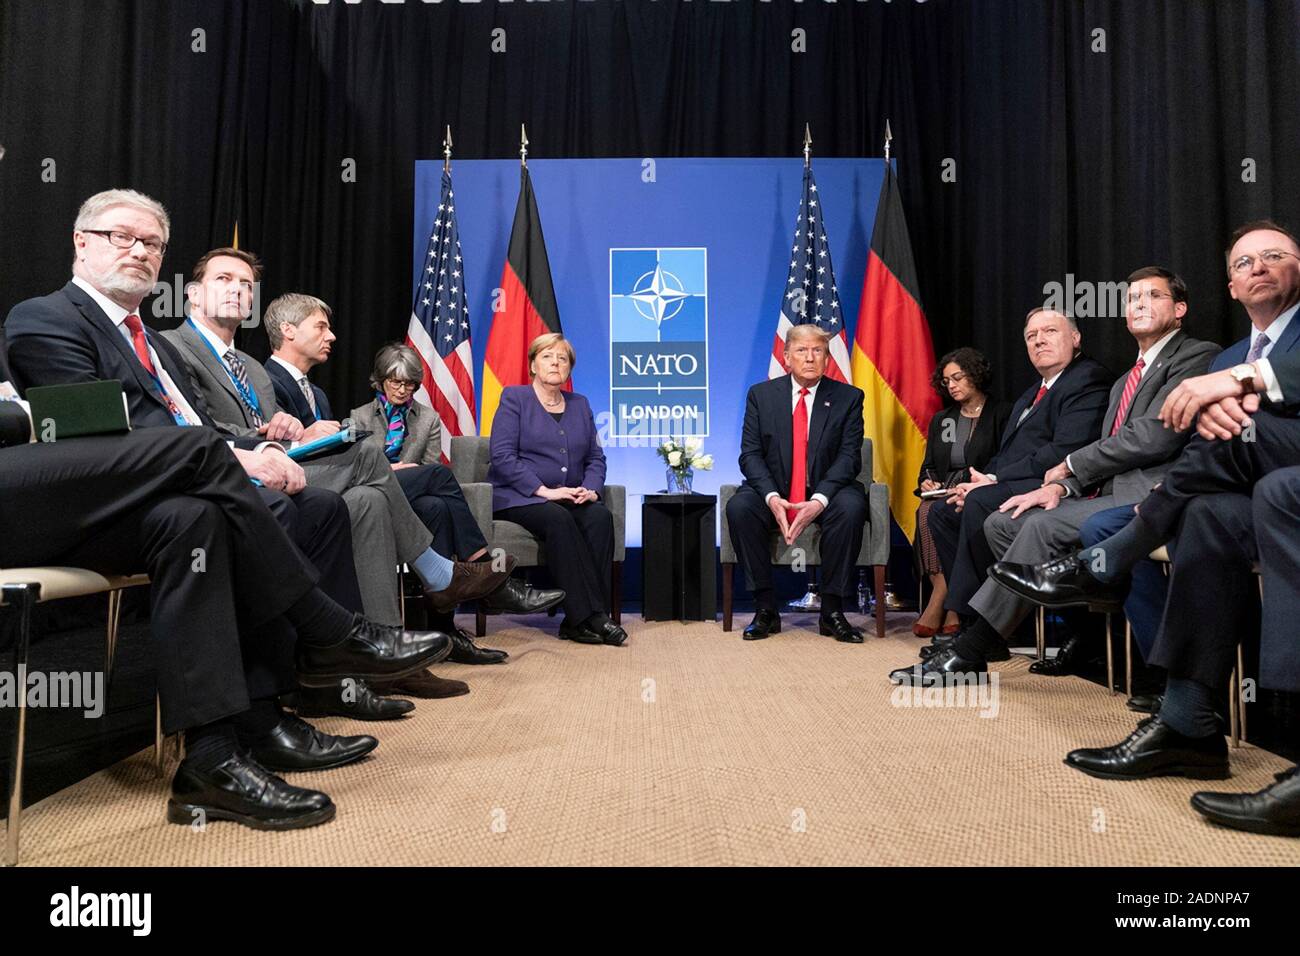 Watford, United Kingdom. 04 December, 2019. U.S. President Donald Trump and German Chancellor Angela Merkel hold a bilateral meeting on the sidelines of the NATO Summit December 4, 2019 in Watford, Hertfordshire, United Kingdom.   Credit: Shealah Craighead/Planetpix/Alamy Live News Stock Photo